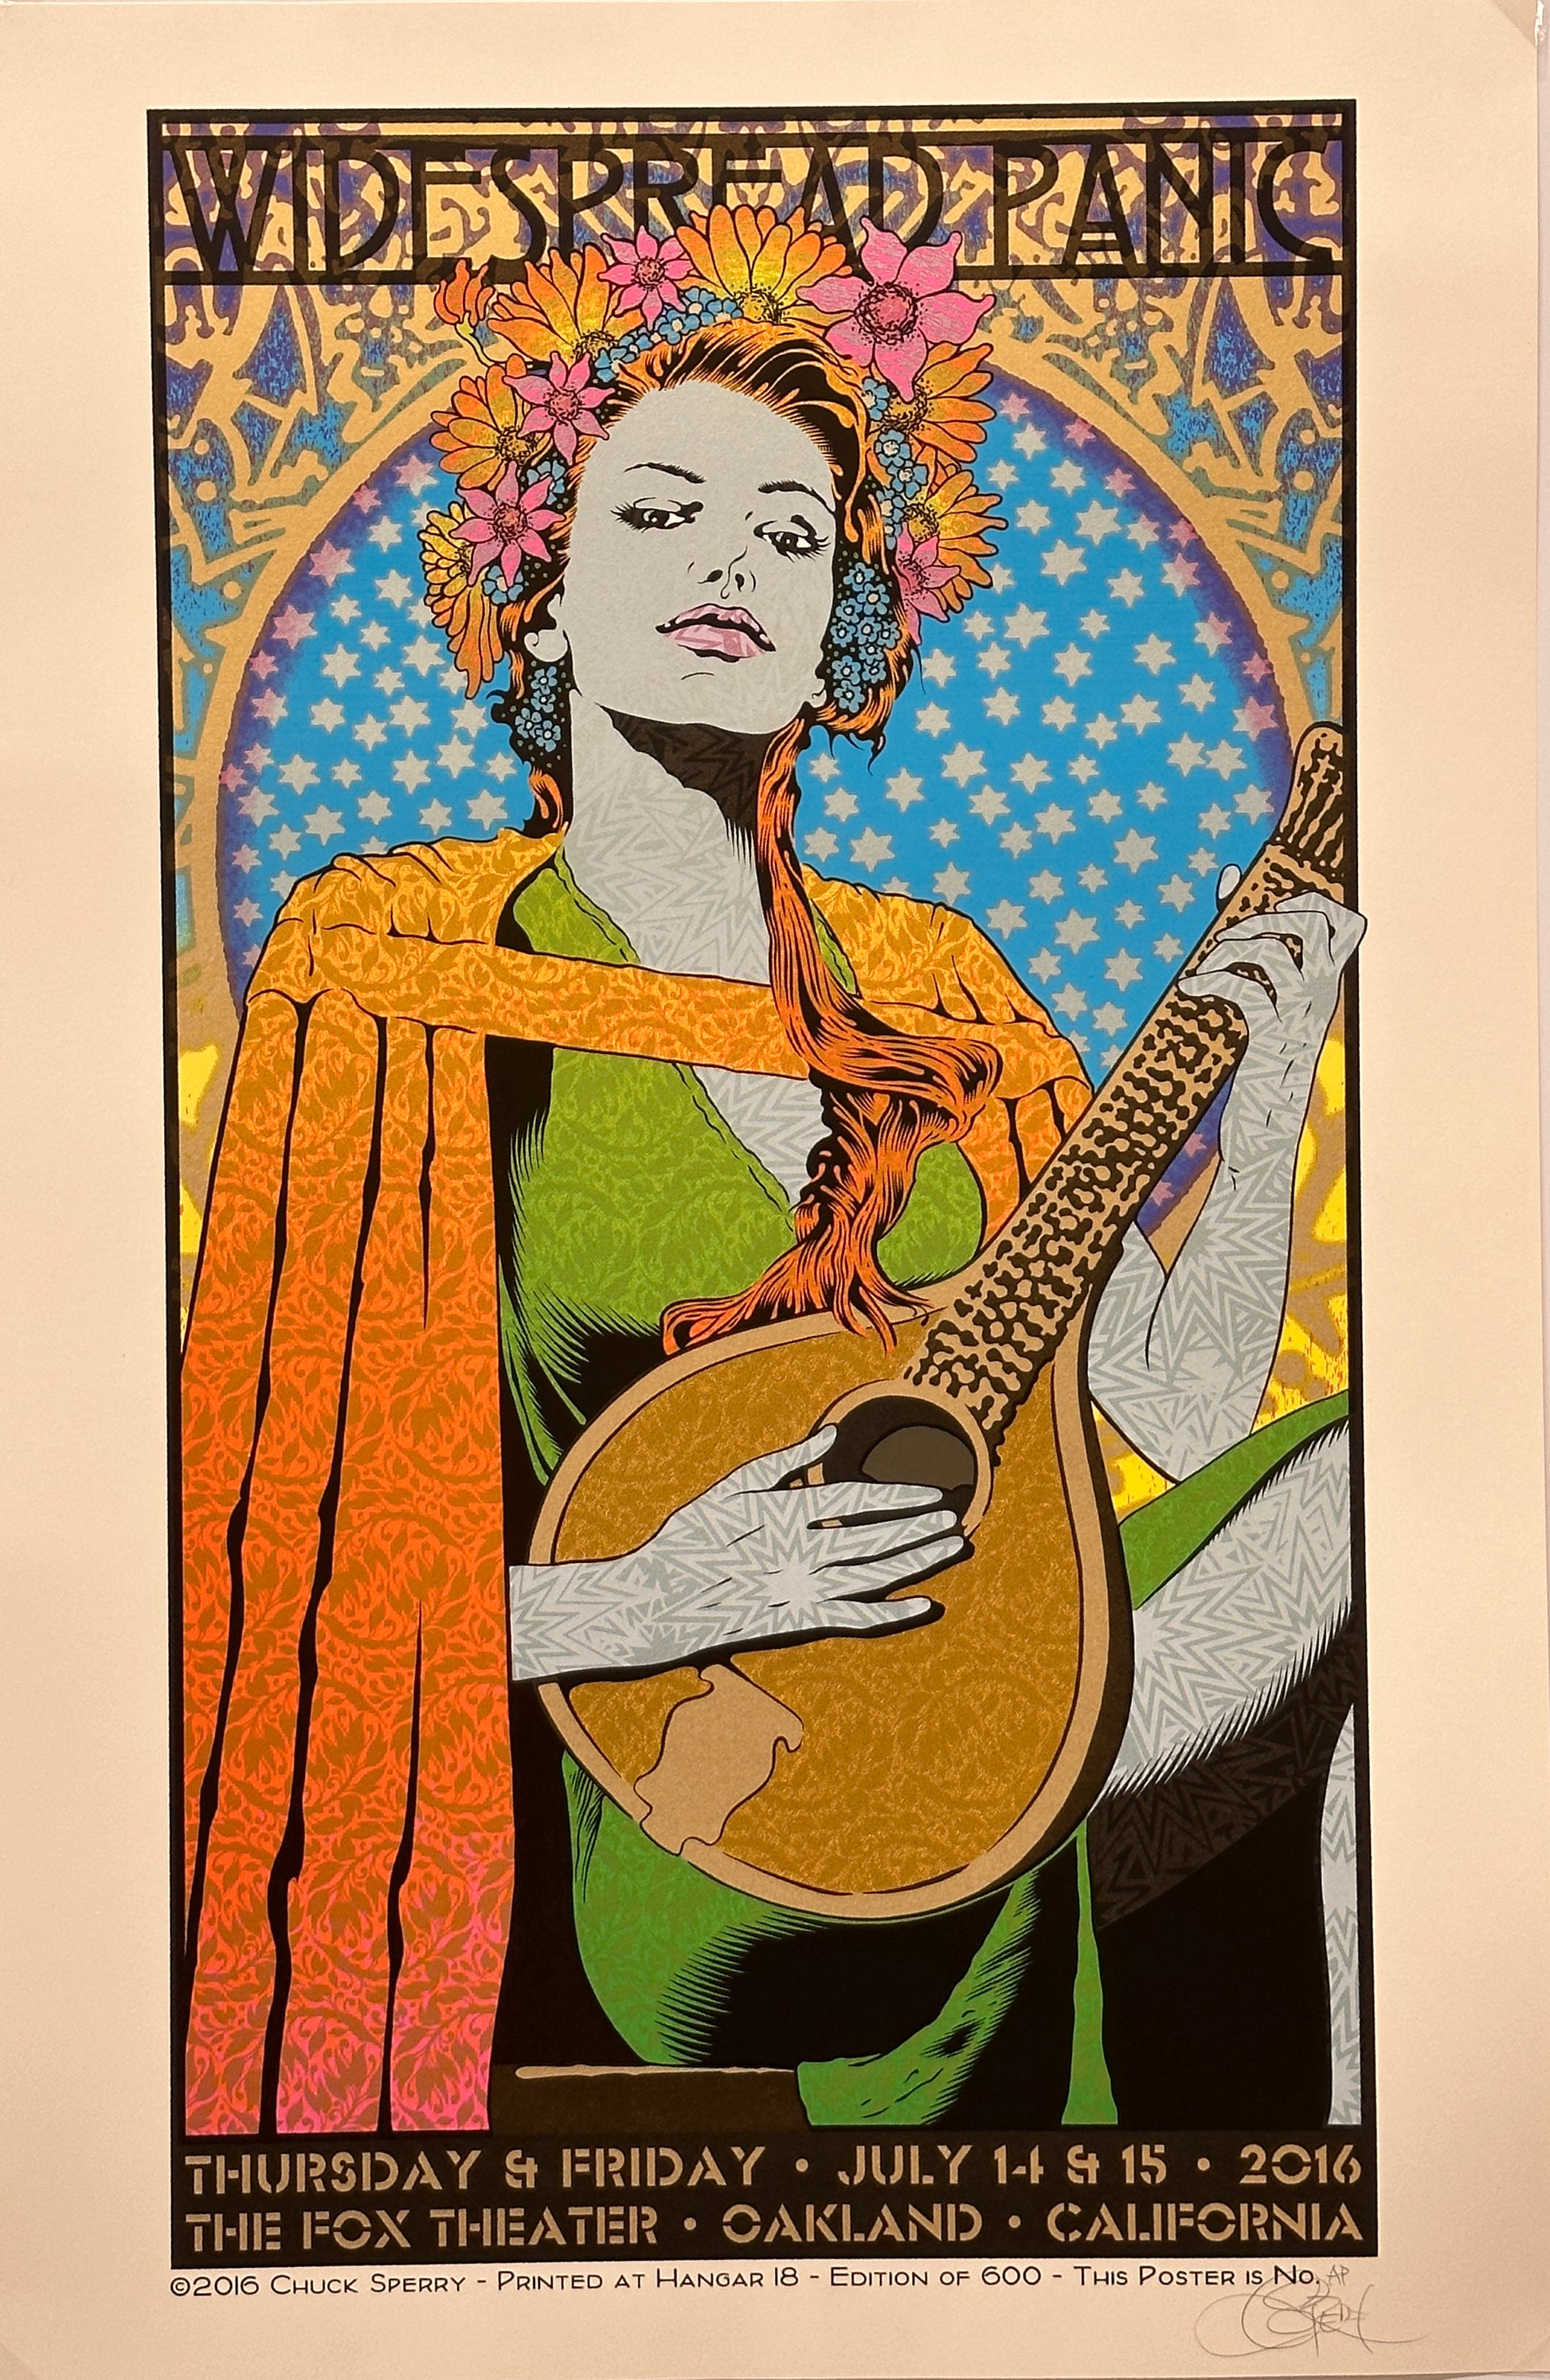  by Chuck Sperry titled Chuck Sperry - "Widespread Panic - Terpsichore"